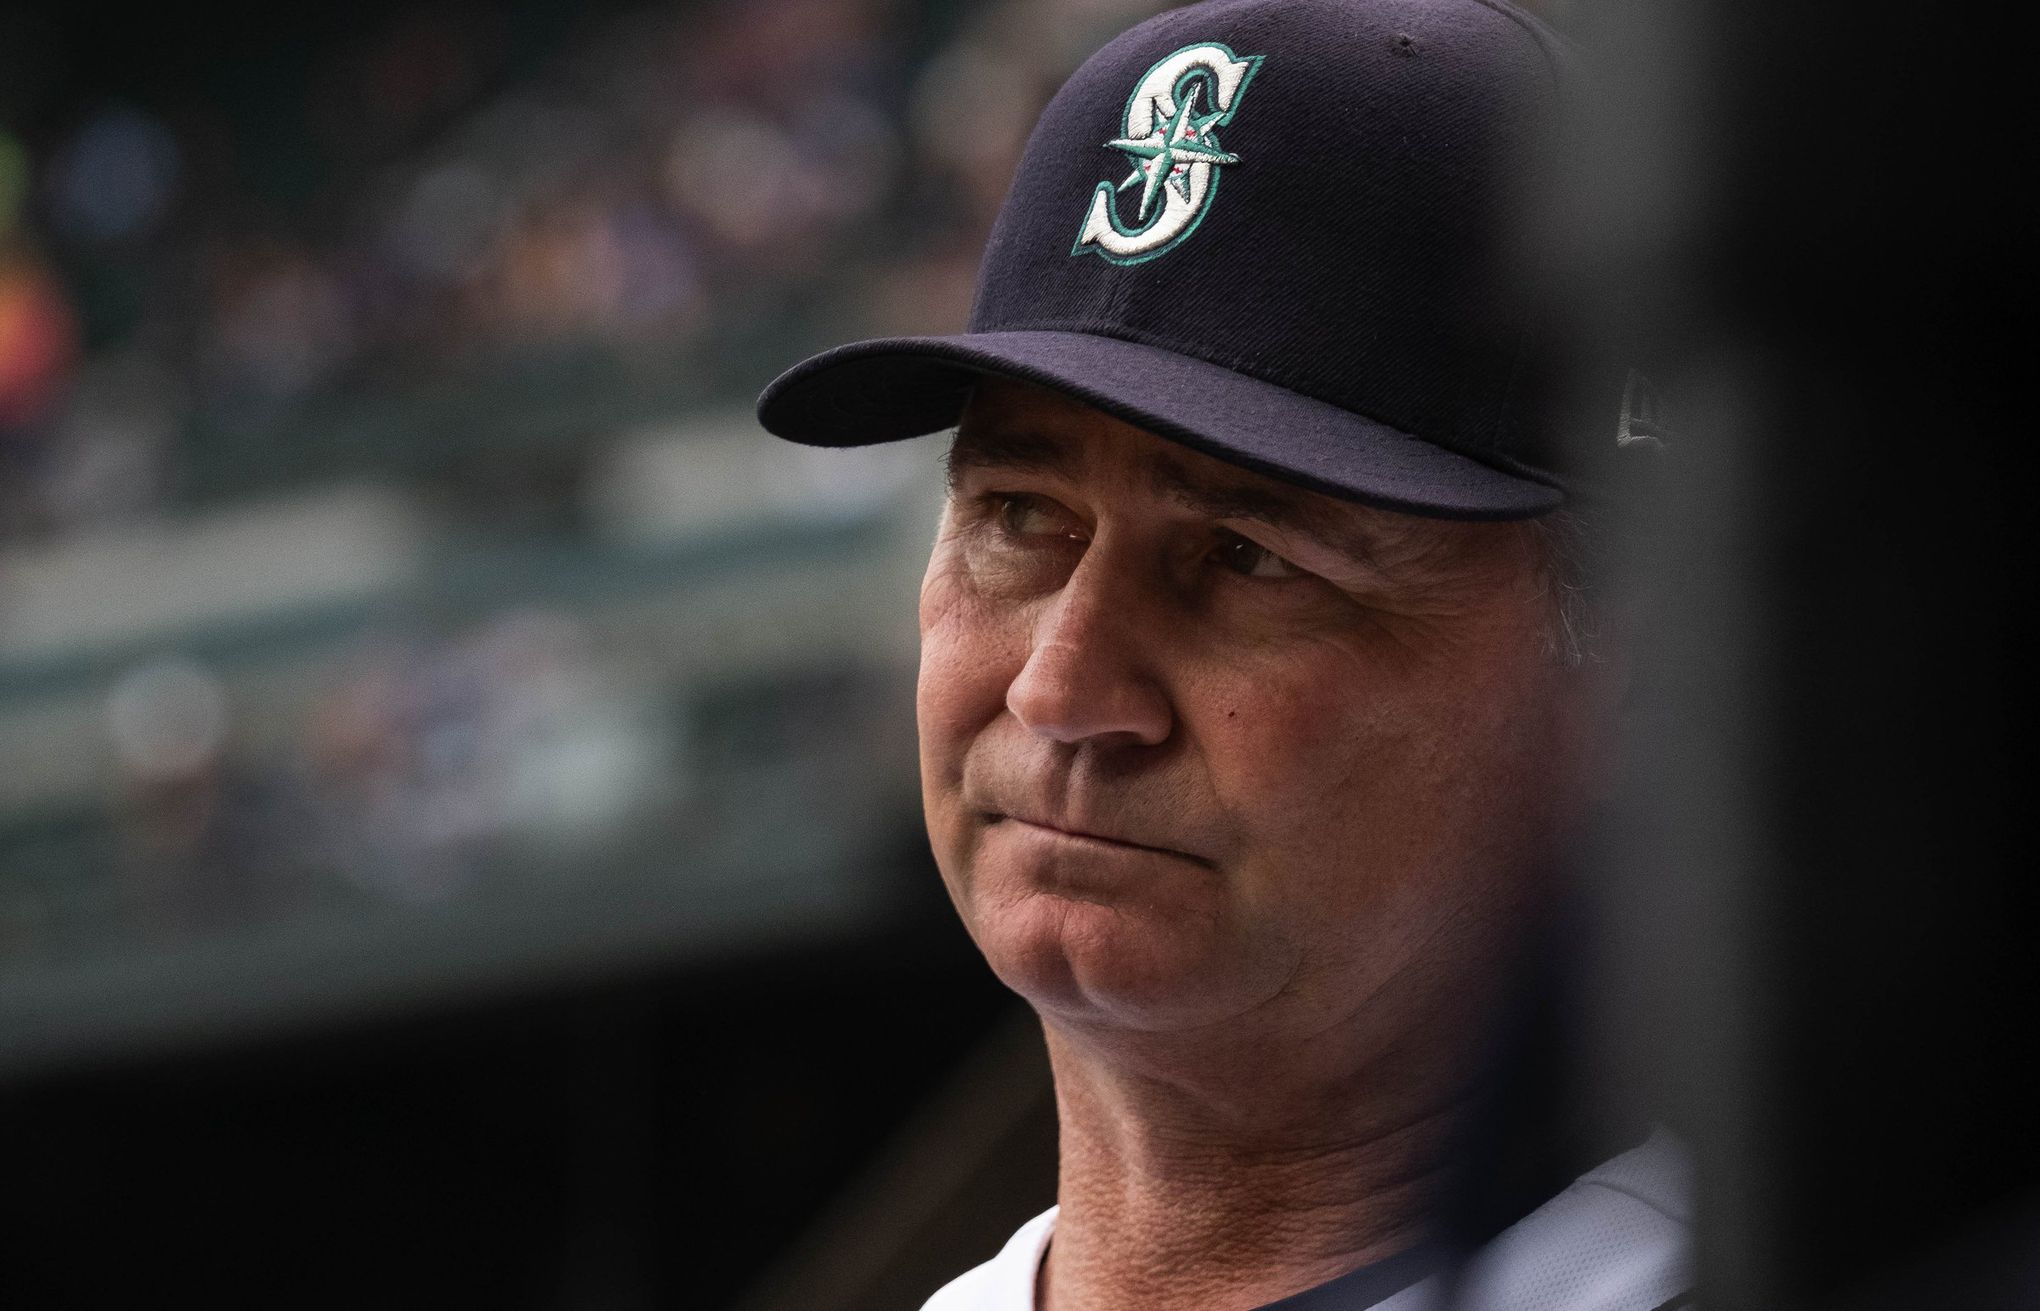 Groz: Why this is the most important Mariners season of the last